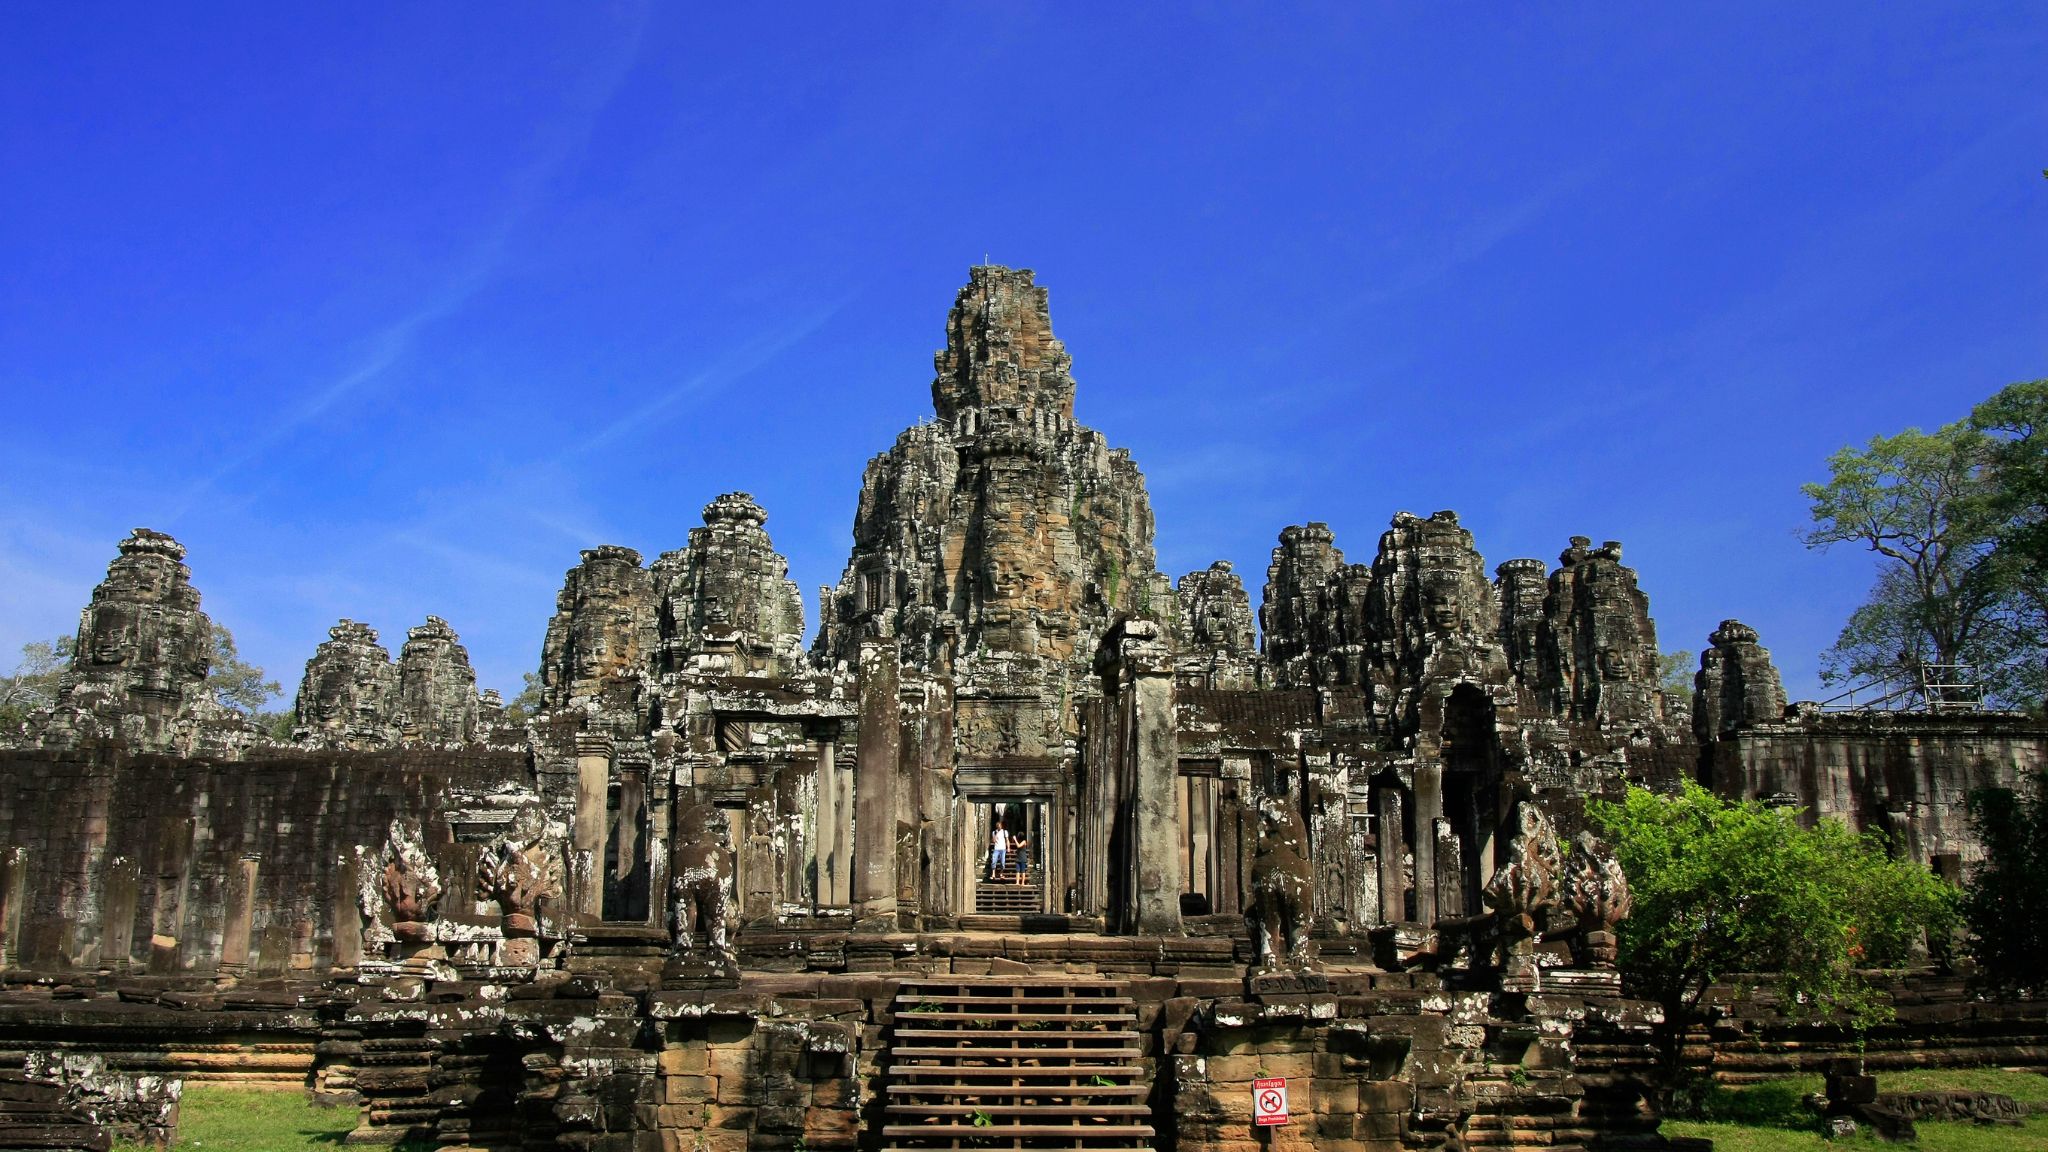 Day 1 Take On A Sunset Tour To The Magnificent Angkor Wat Temple, The Biggest Religious Temple In The World